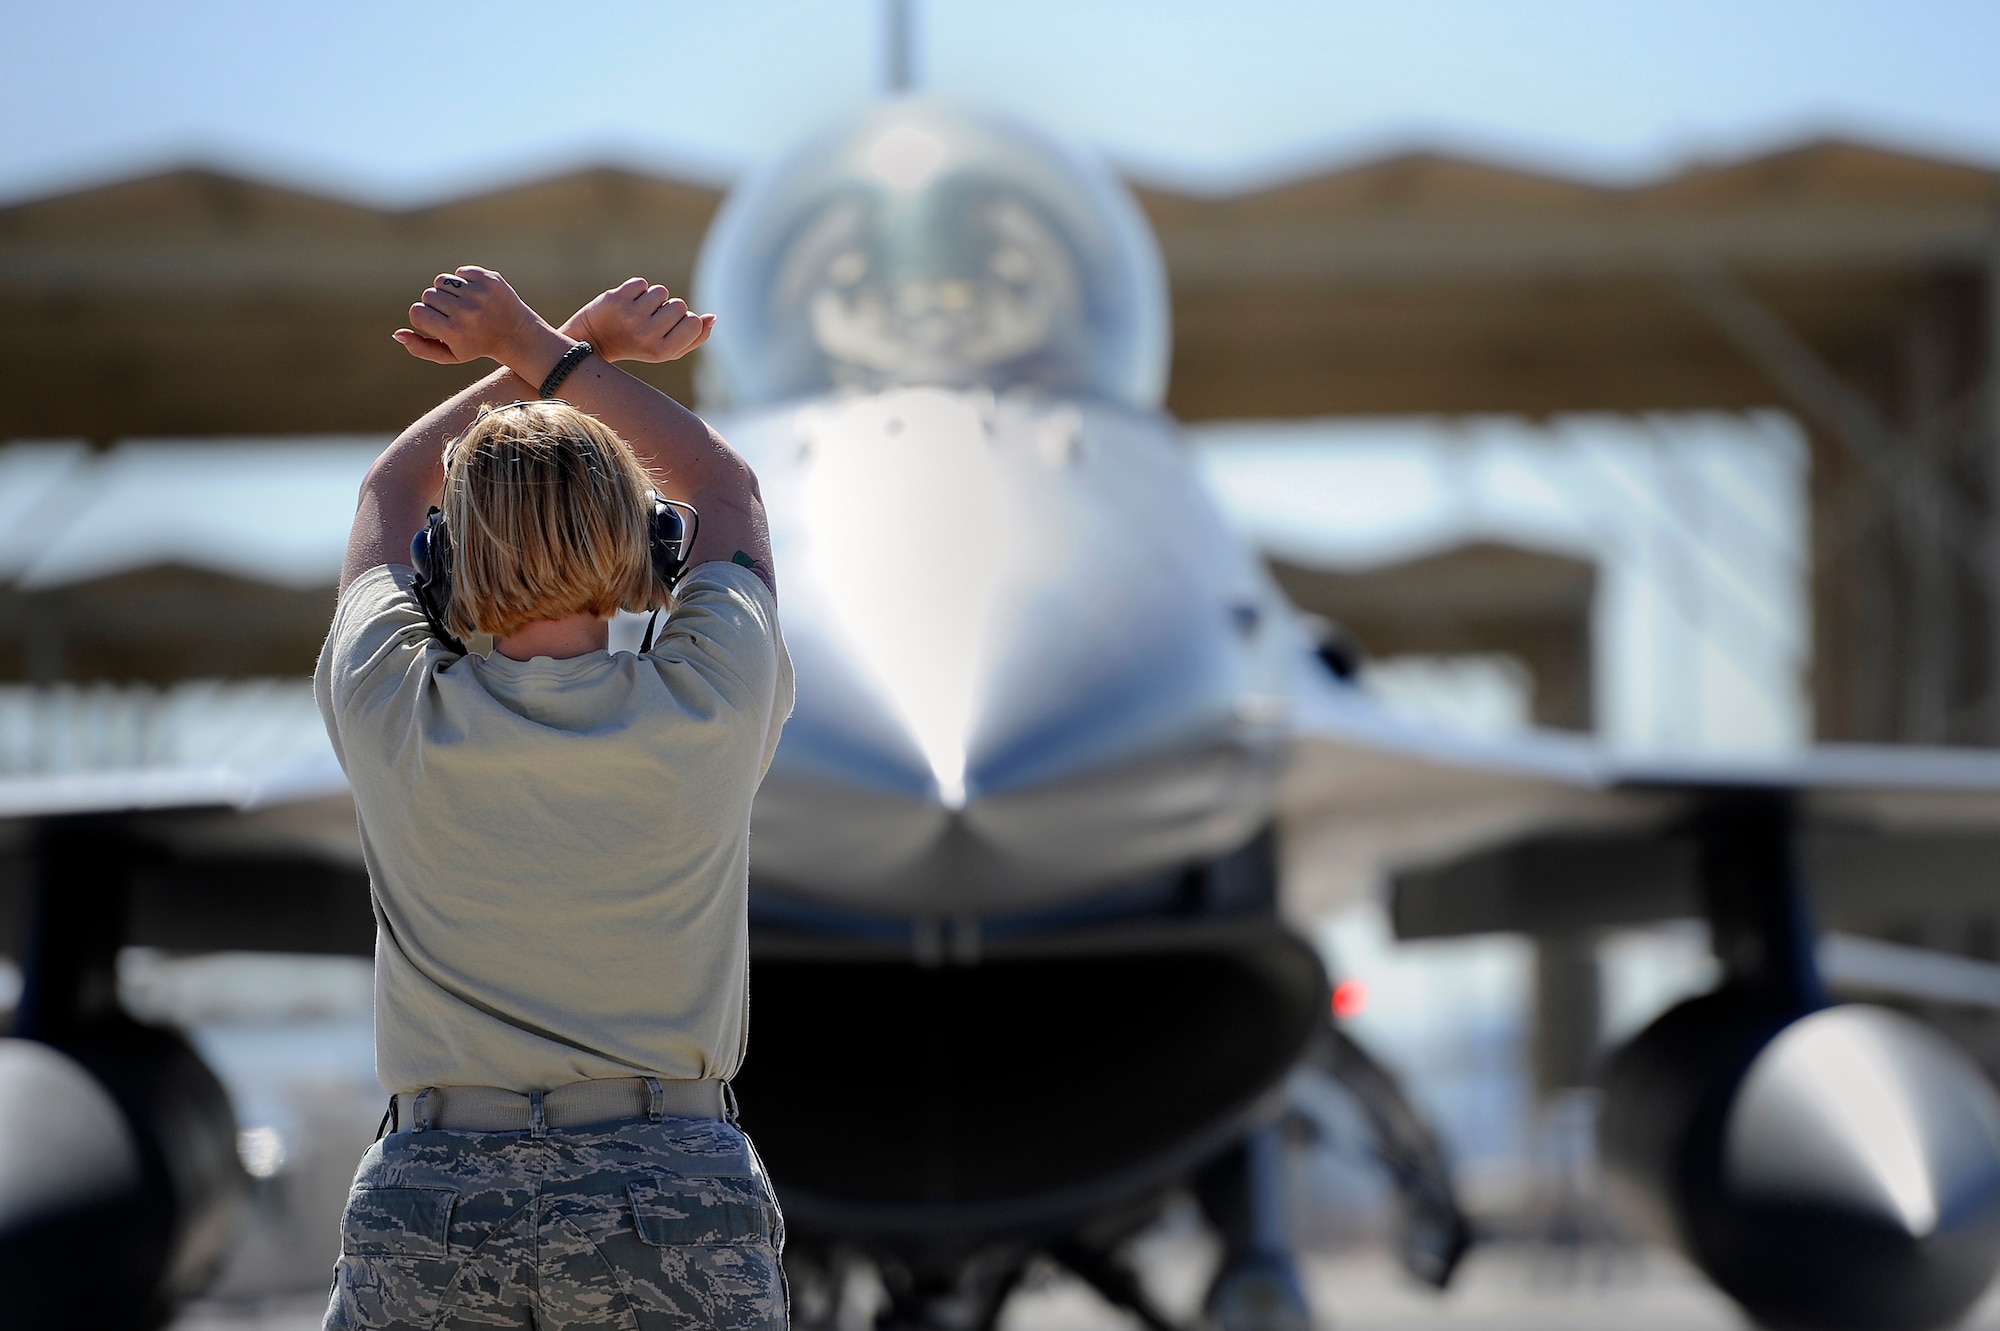 U.S. Air Force Staff Sgt. Elizabeth Tyburski, 20th Communications Squadron client service technician, marshalls a 79th Fighter Squadron ‘Tigers’ F-16 Fighting Falcon during Red Flag 13-3, March 12, 2013, Nellis Air Force Base, Nev. Tyburski received the rare opportunity to launch an F-16 and experienced what it’s like to be a crew chief. (U.S. Air Force photo by Staff Sgt. Kenny Holston/Released)